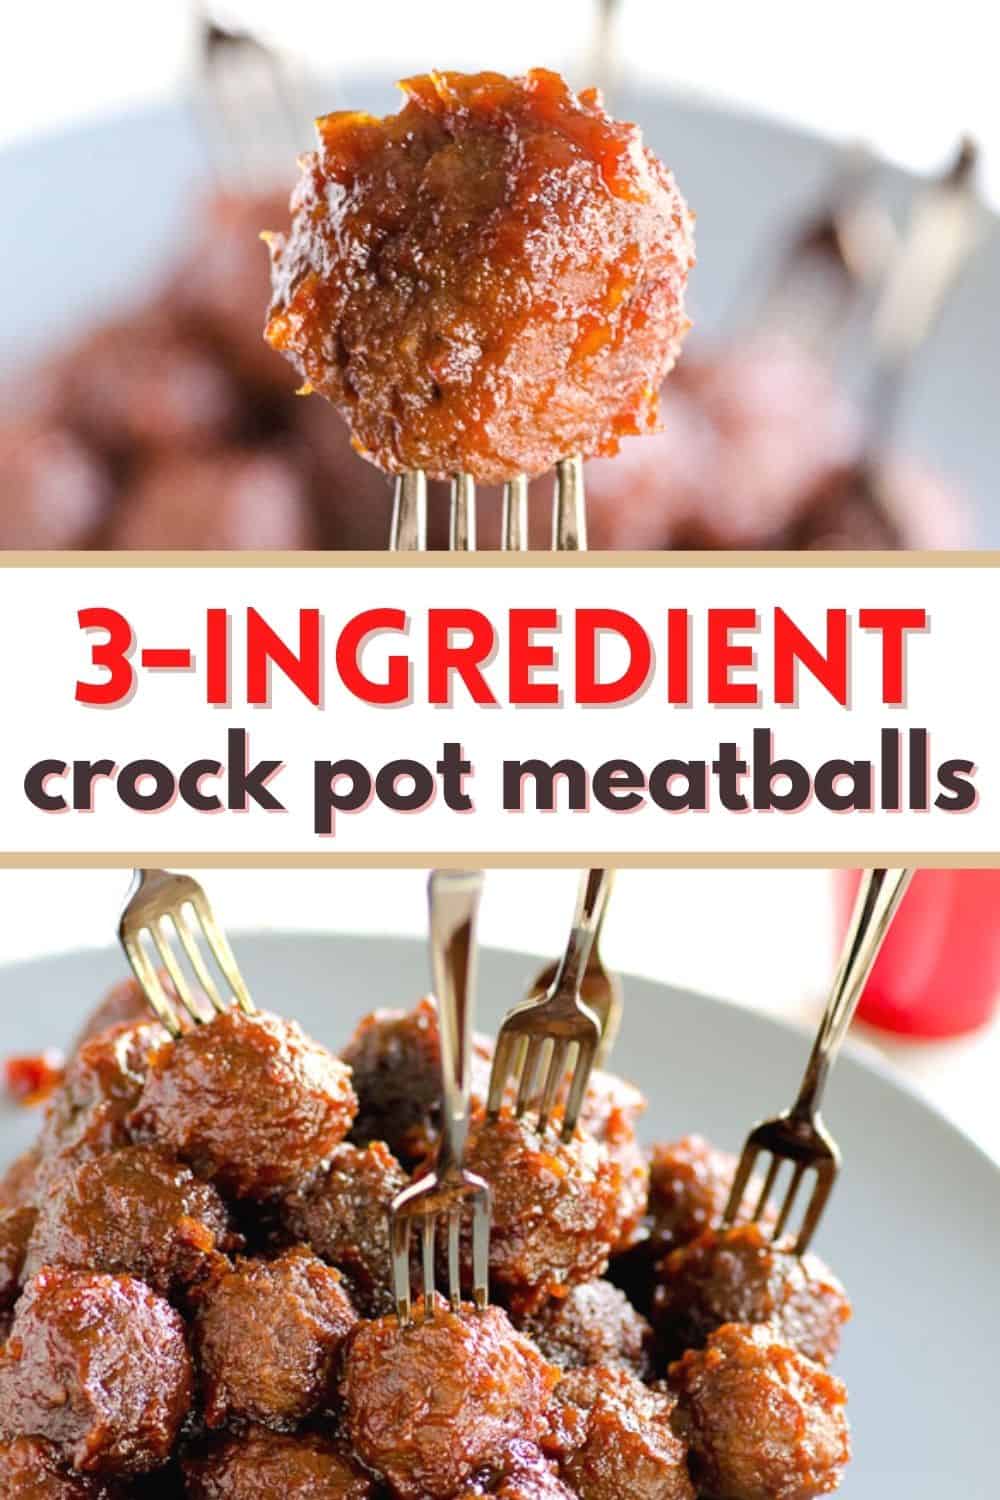 Only three ingredients for these sweet and sour meatballs in the Crock Pot!